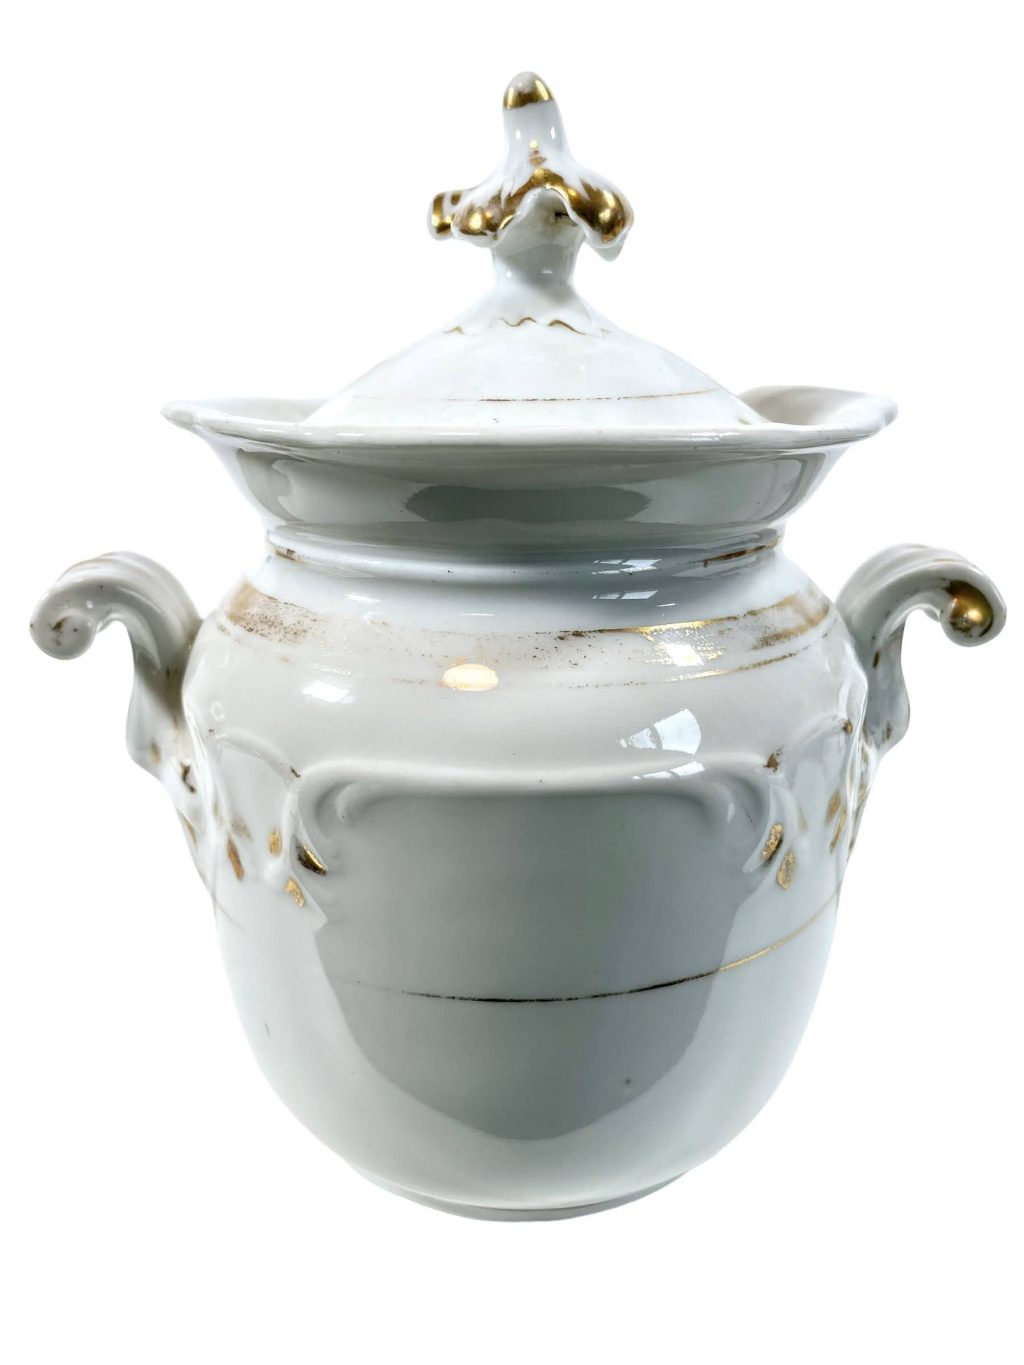 Antique French White Gold Hand Painted Porcelain Sugar Lidded Pot Ceramic Container With Lid circa 1910-20’s